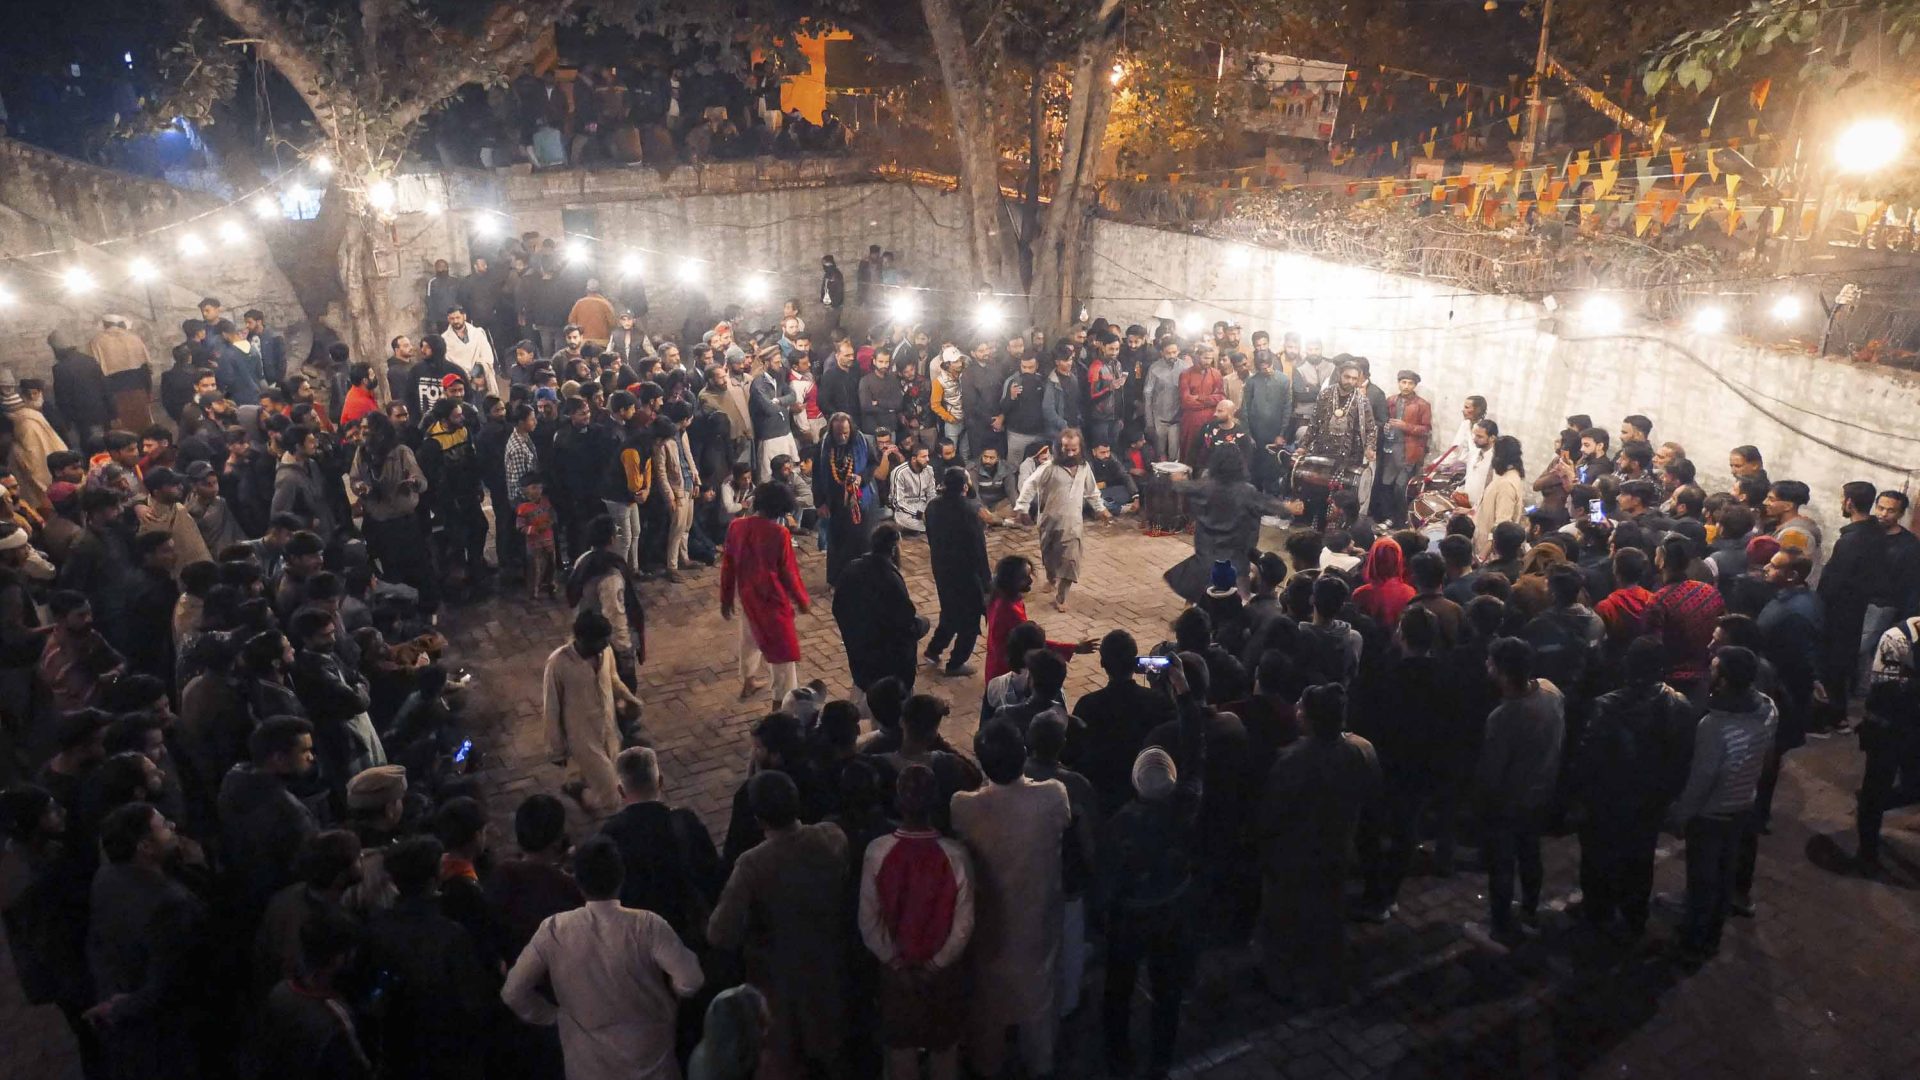 Drugs, drums and universal love: Inside Lahore’s spiritual dance party